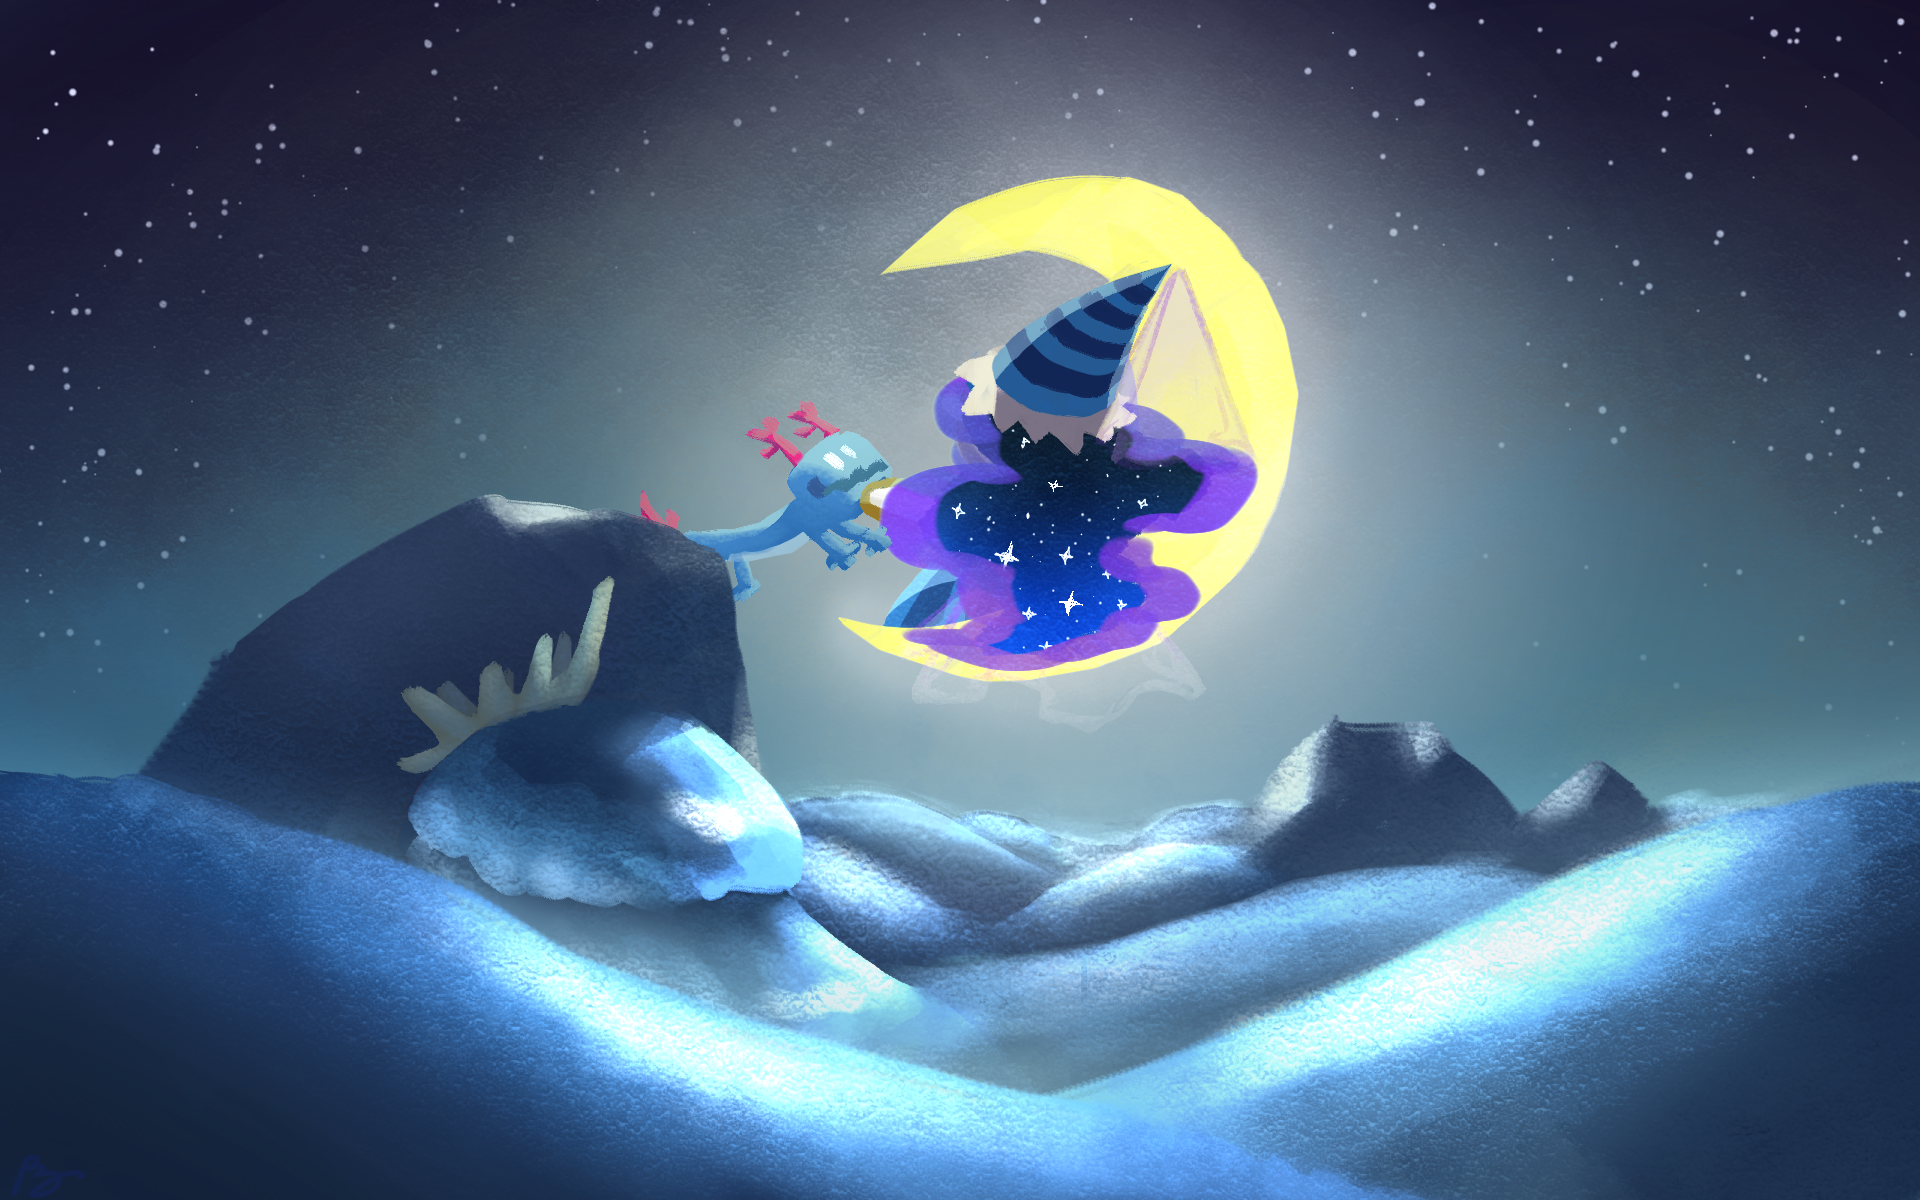 A Painting Of Sea Fairy And Moonlight Cookie Thought I D Share My